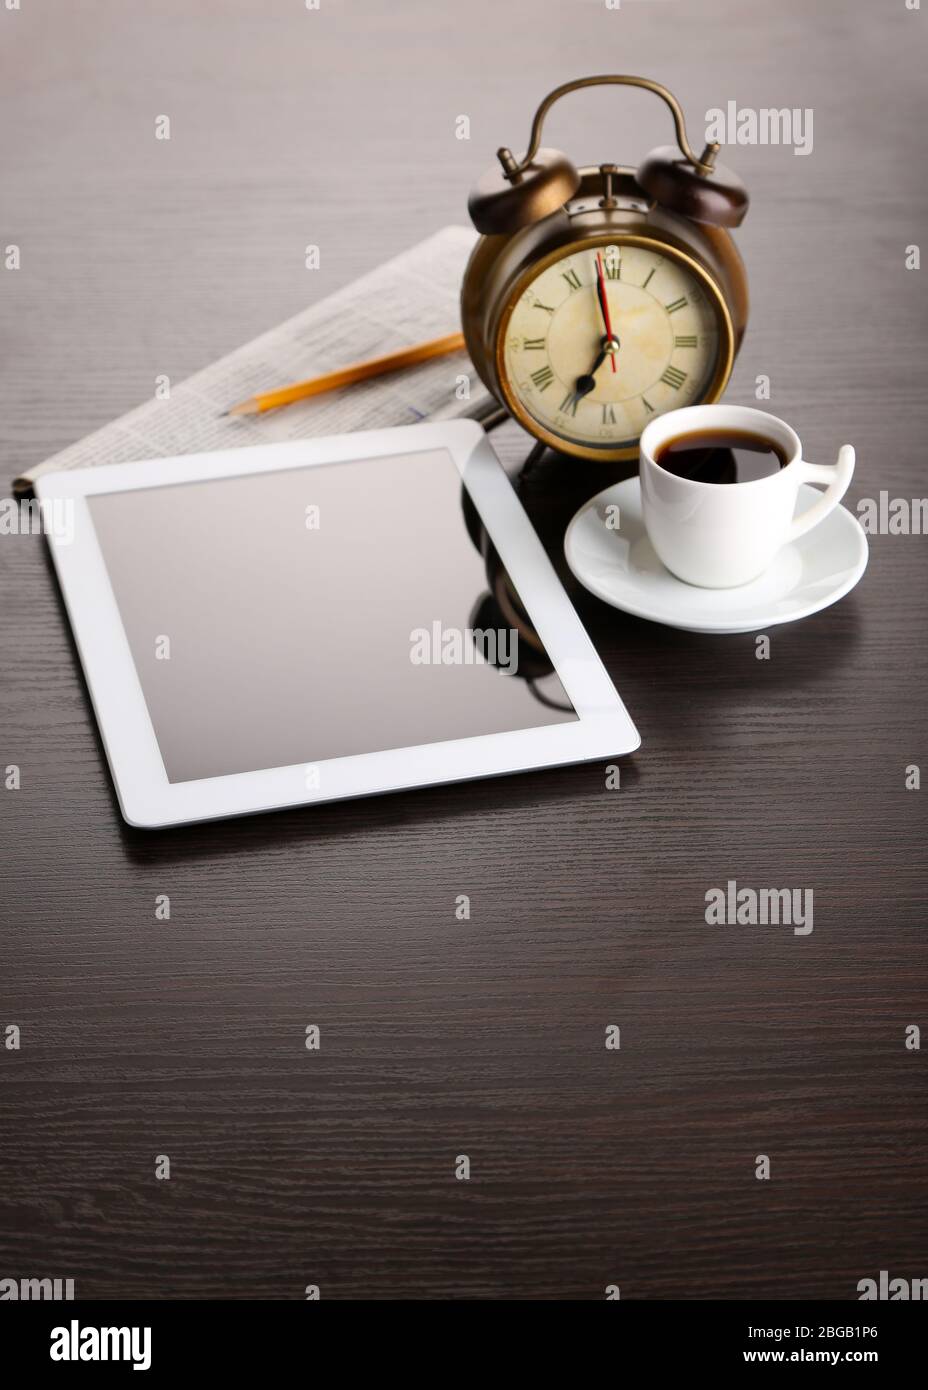 https://c8.alamy.com/comp/2BGB1P6/tablet-newspaper-cup-of-coffee-and-alarm-clock-on-wooden-table-2BGB1P6.jpg